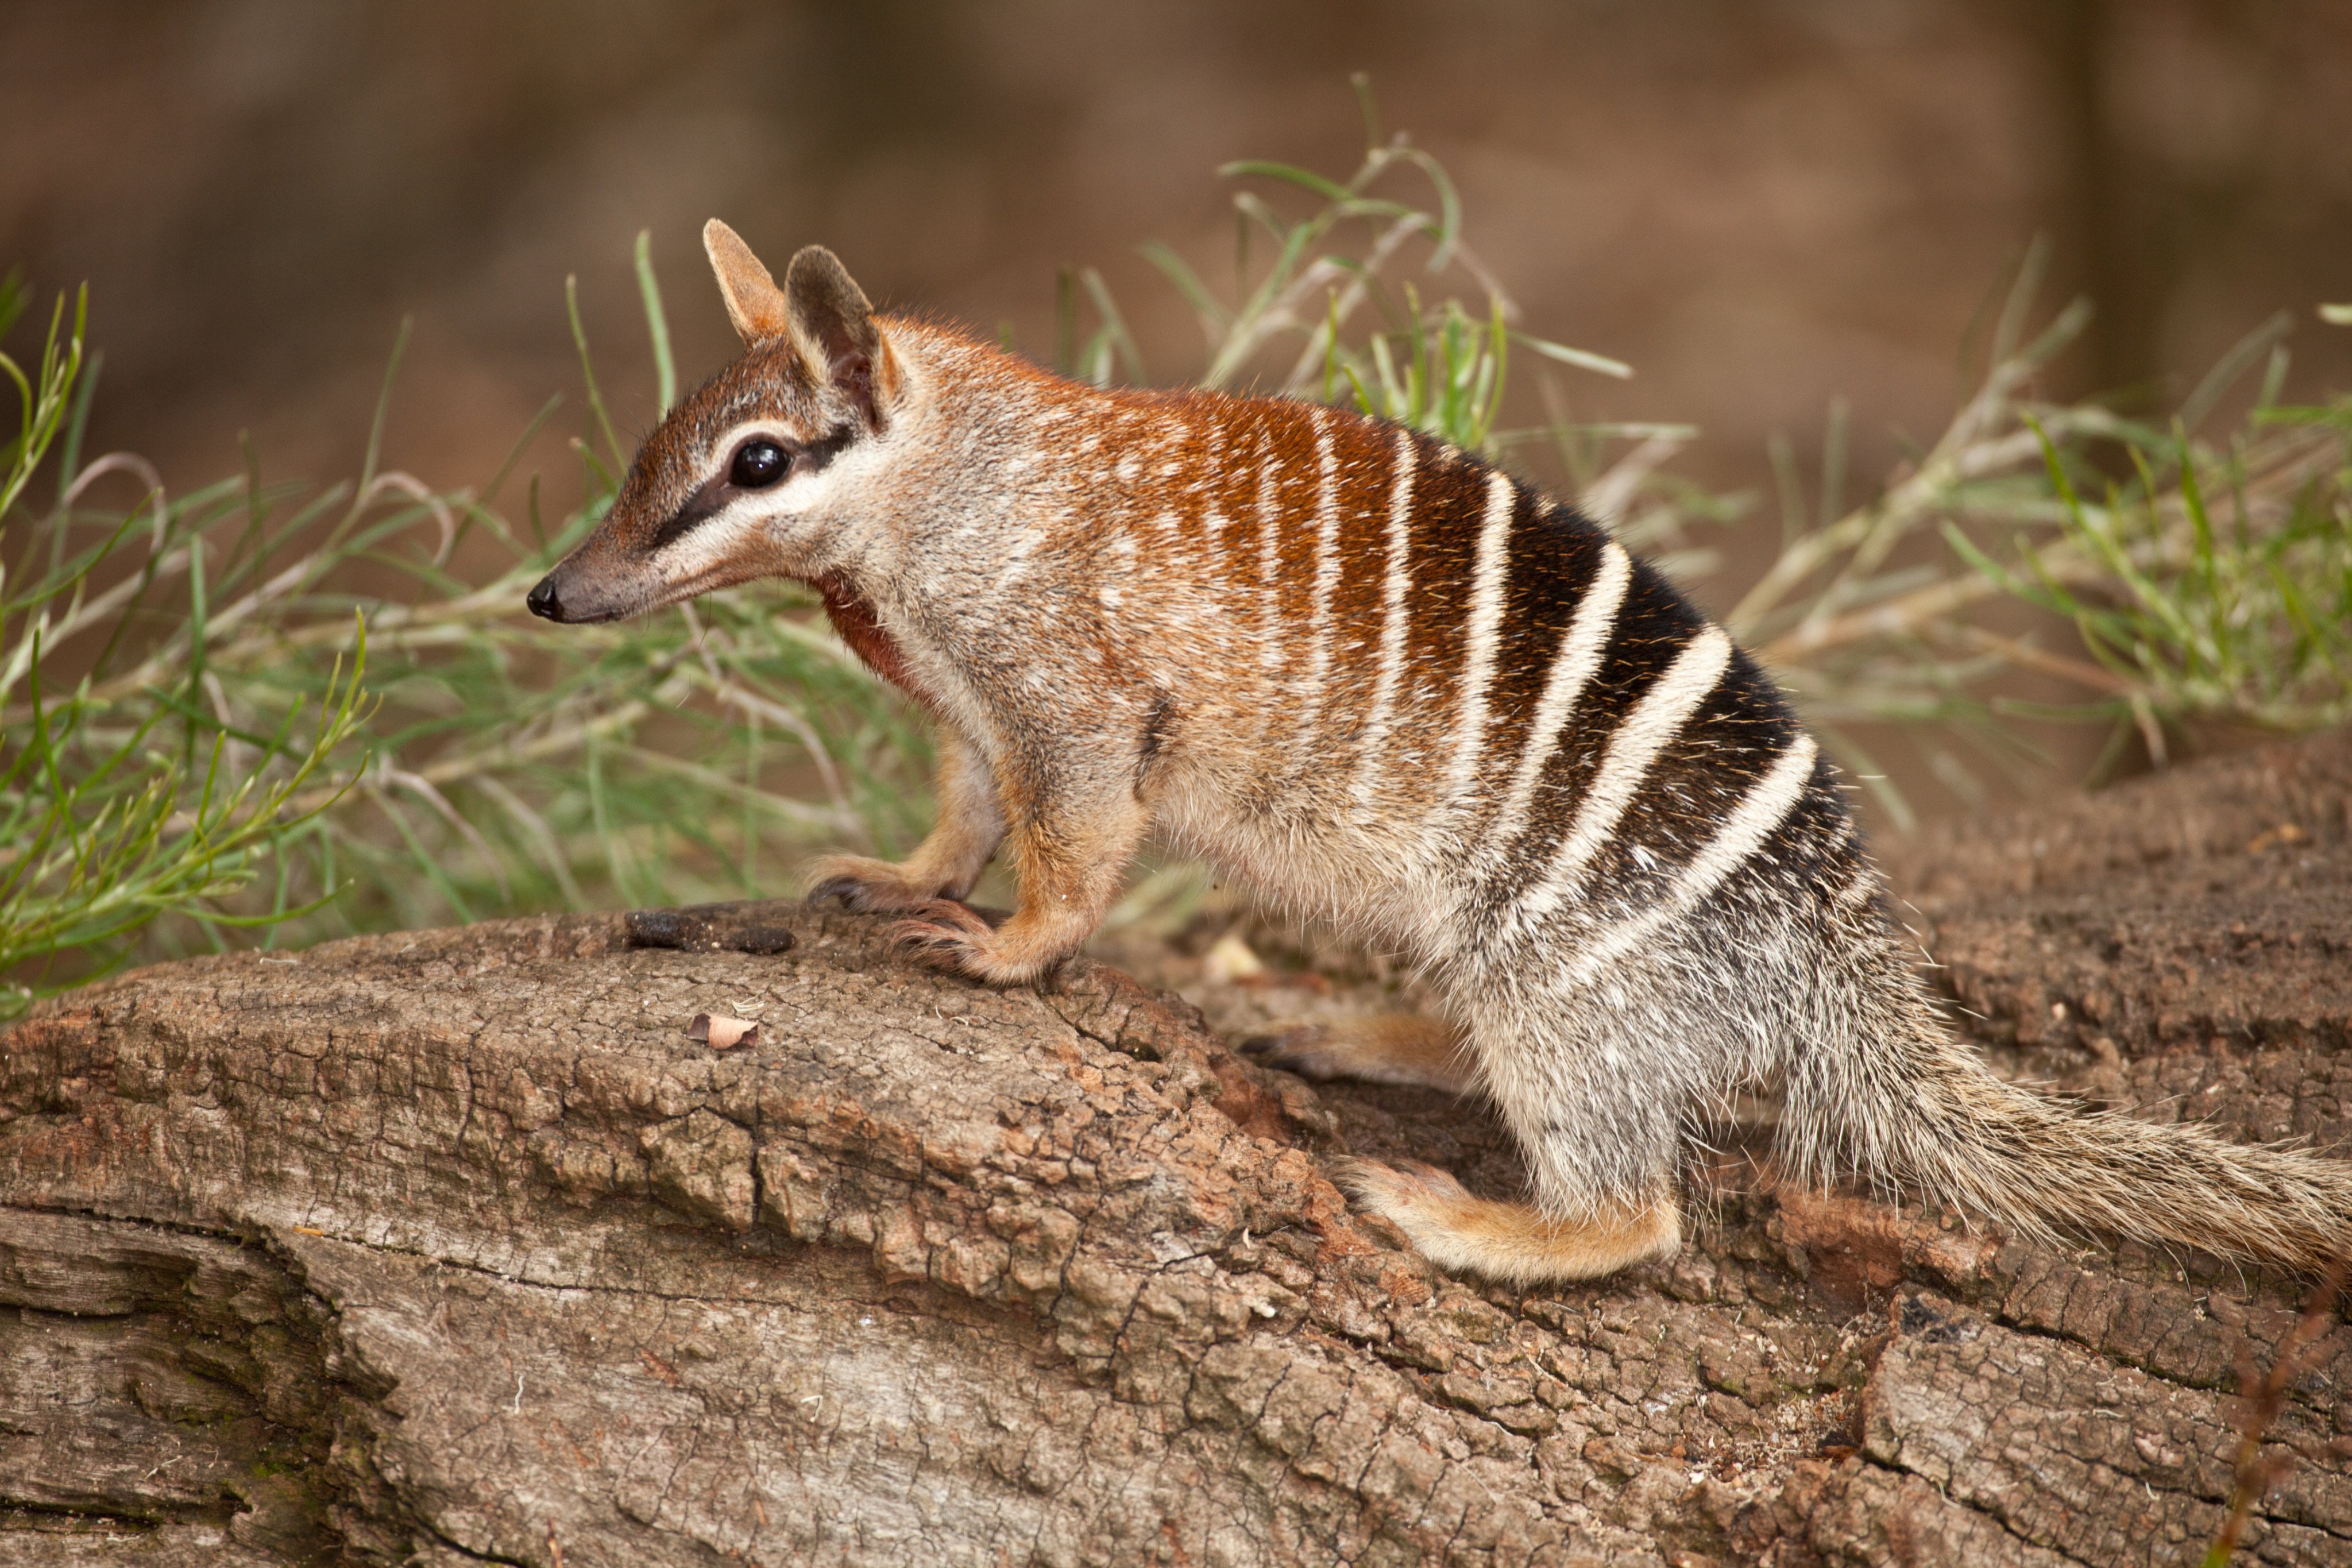 The numbat, a native Australian species 99 per cent extinct, and other endangered small marsupials, have a haven in the newly created Dryandra Woodland National Park in Western Australia. Photo: Shutterstock